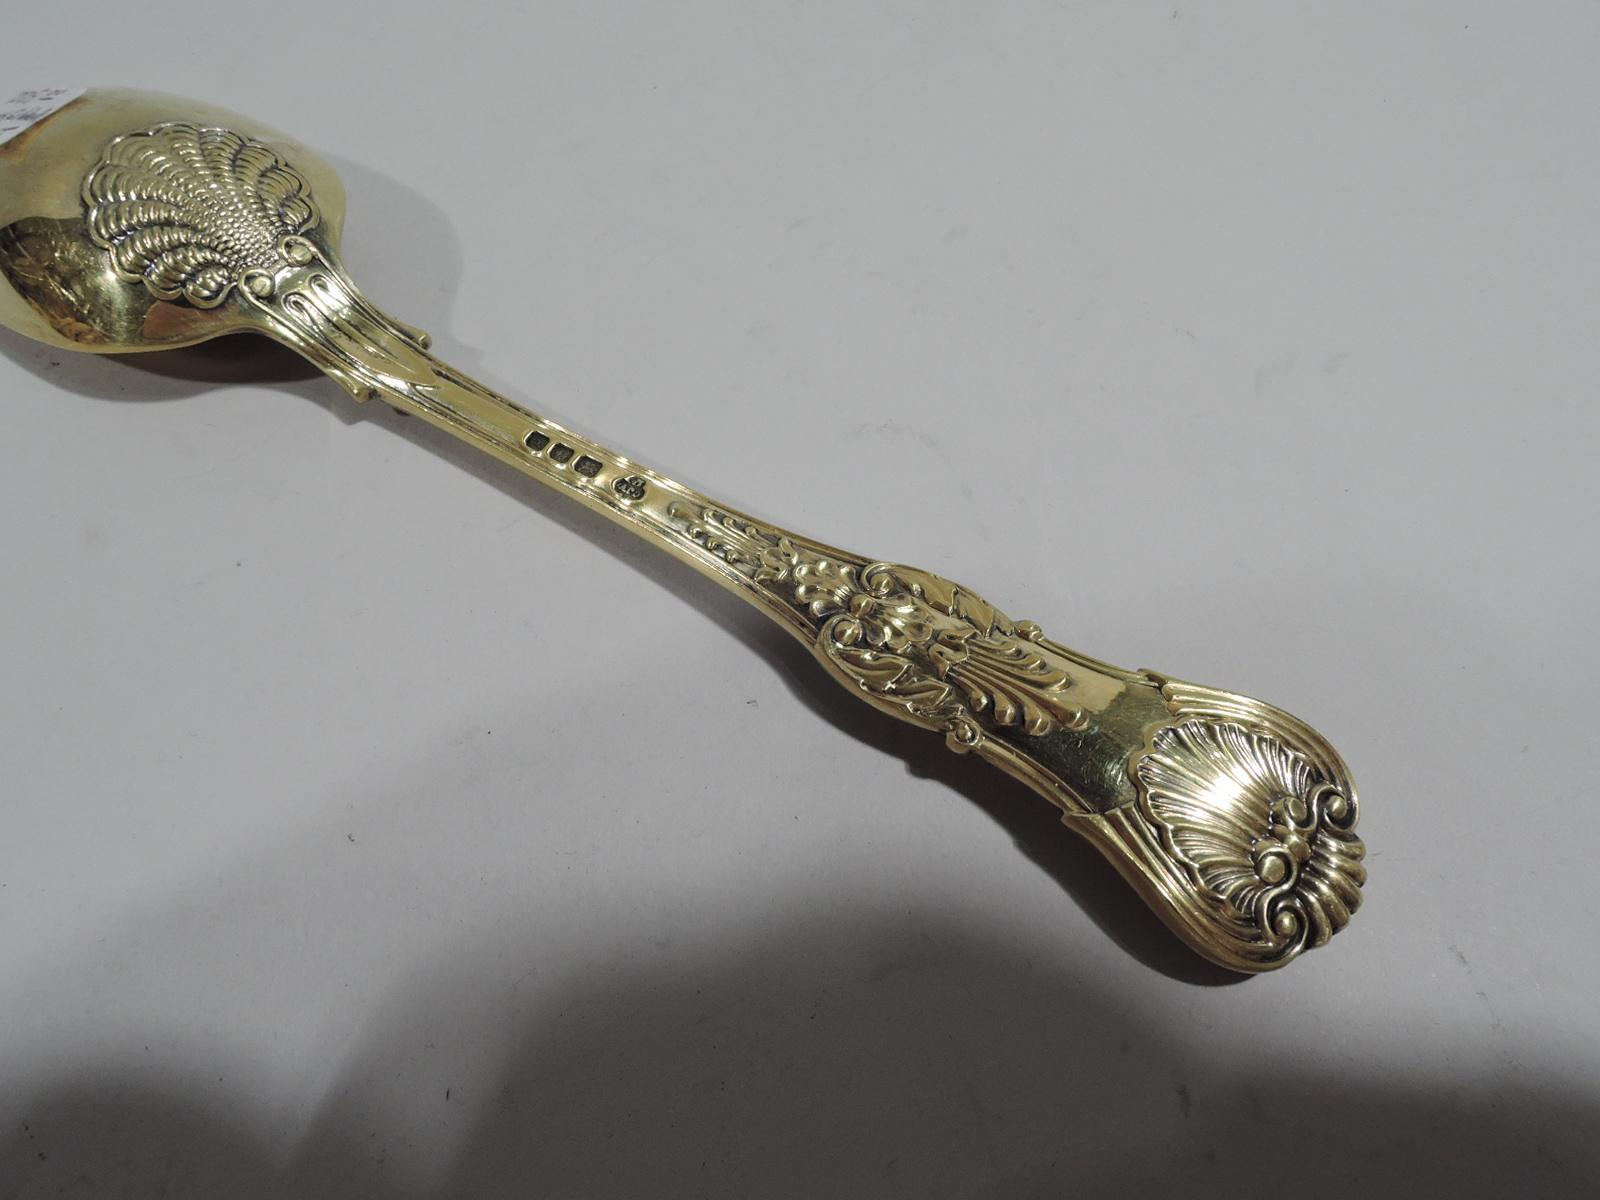 Coburg gilt sterling silver place soup spoon. Made by CJ Vander, Ltd in London in 1959. Double-sided shell, scroll, flower, and fish scale ornament in the Georgian pattern that Paul Storr made in the early 19th century. Fully marked. Weight: 2.3